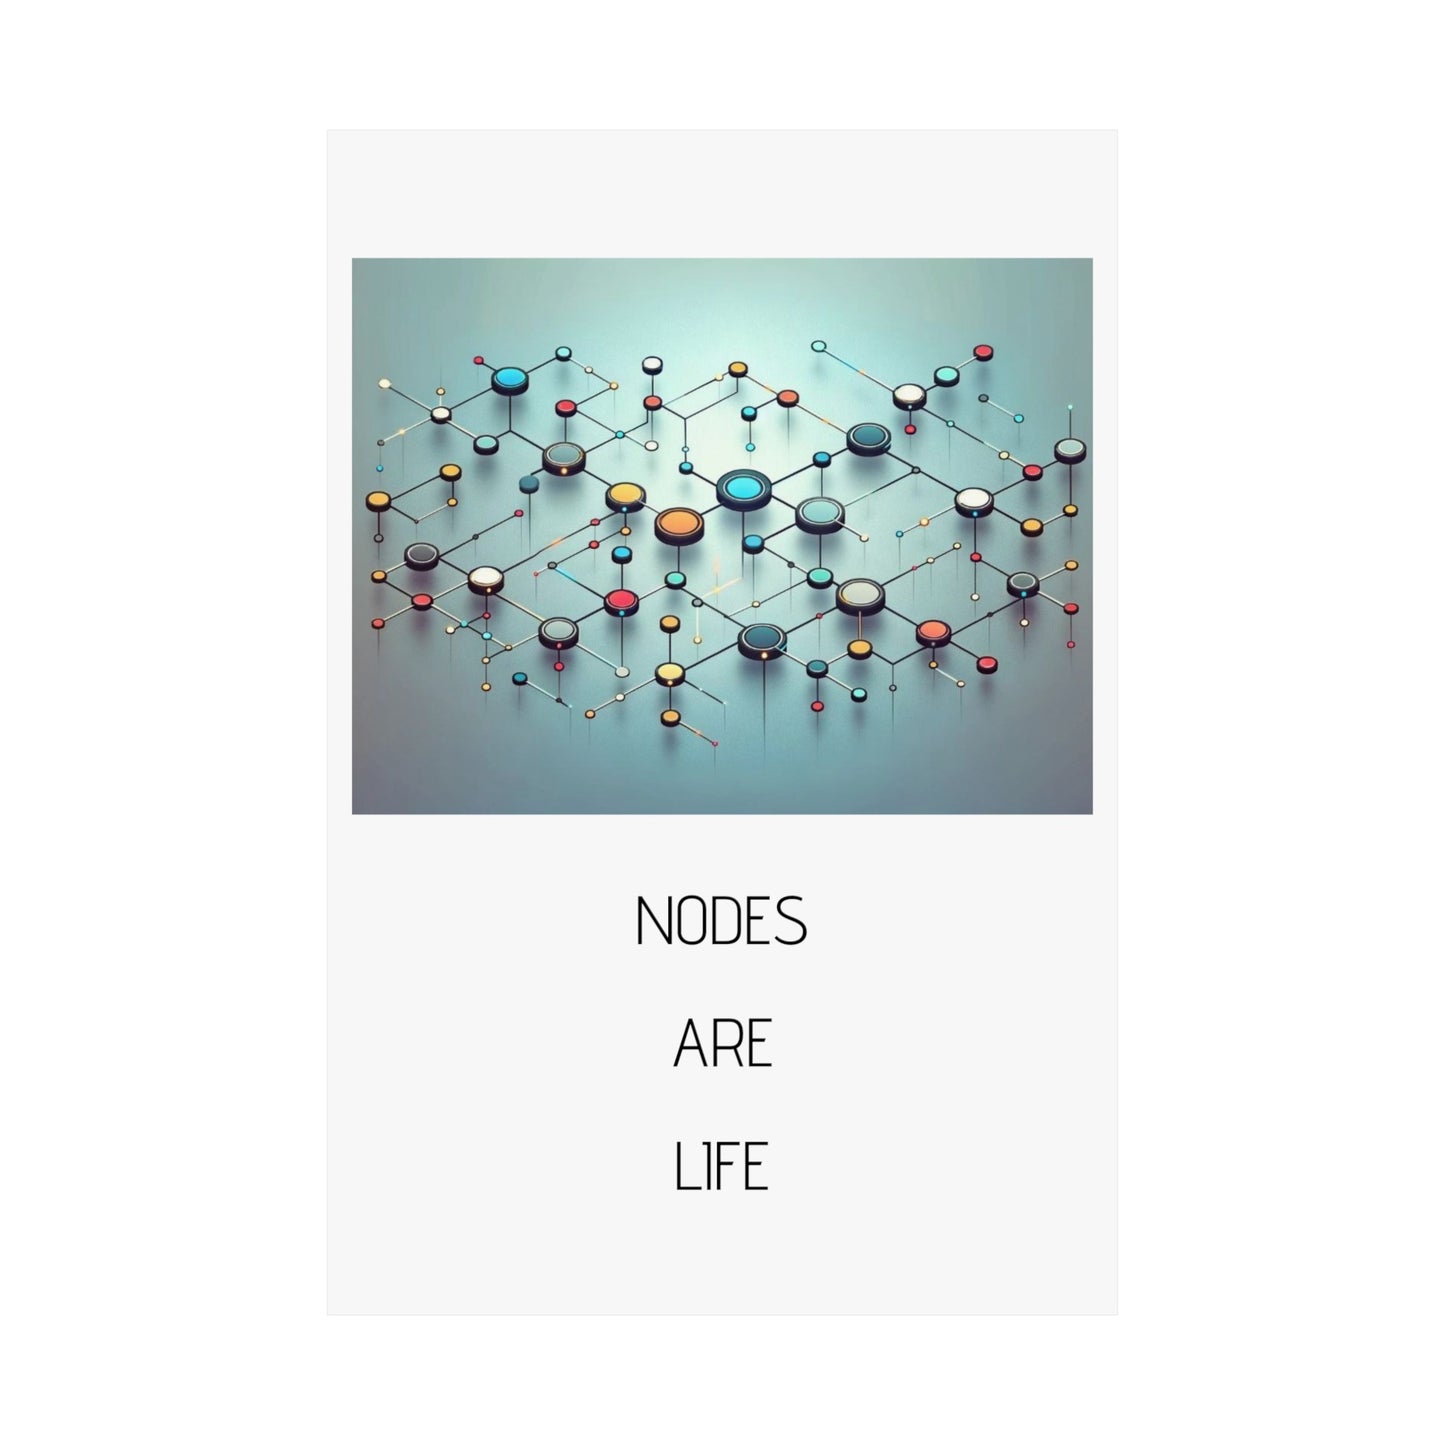 Nodes are life poster